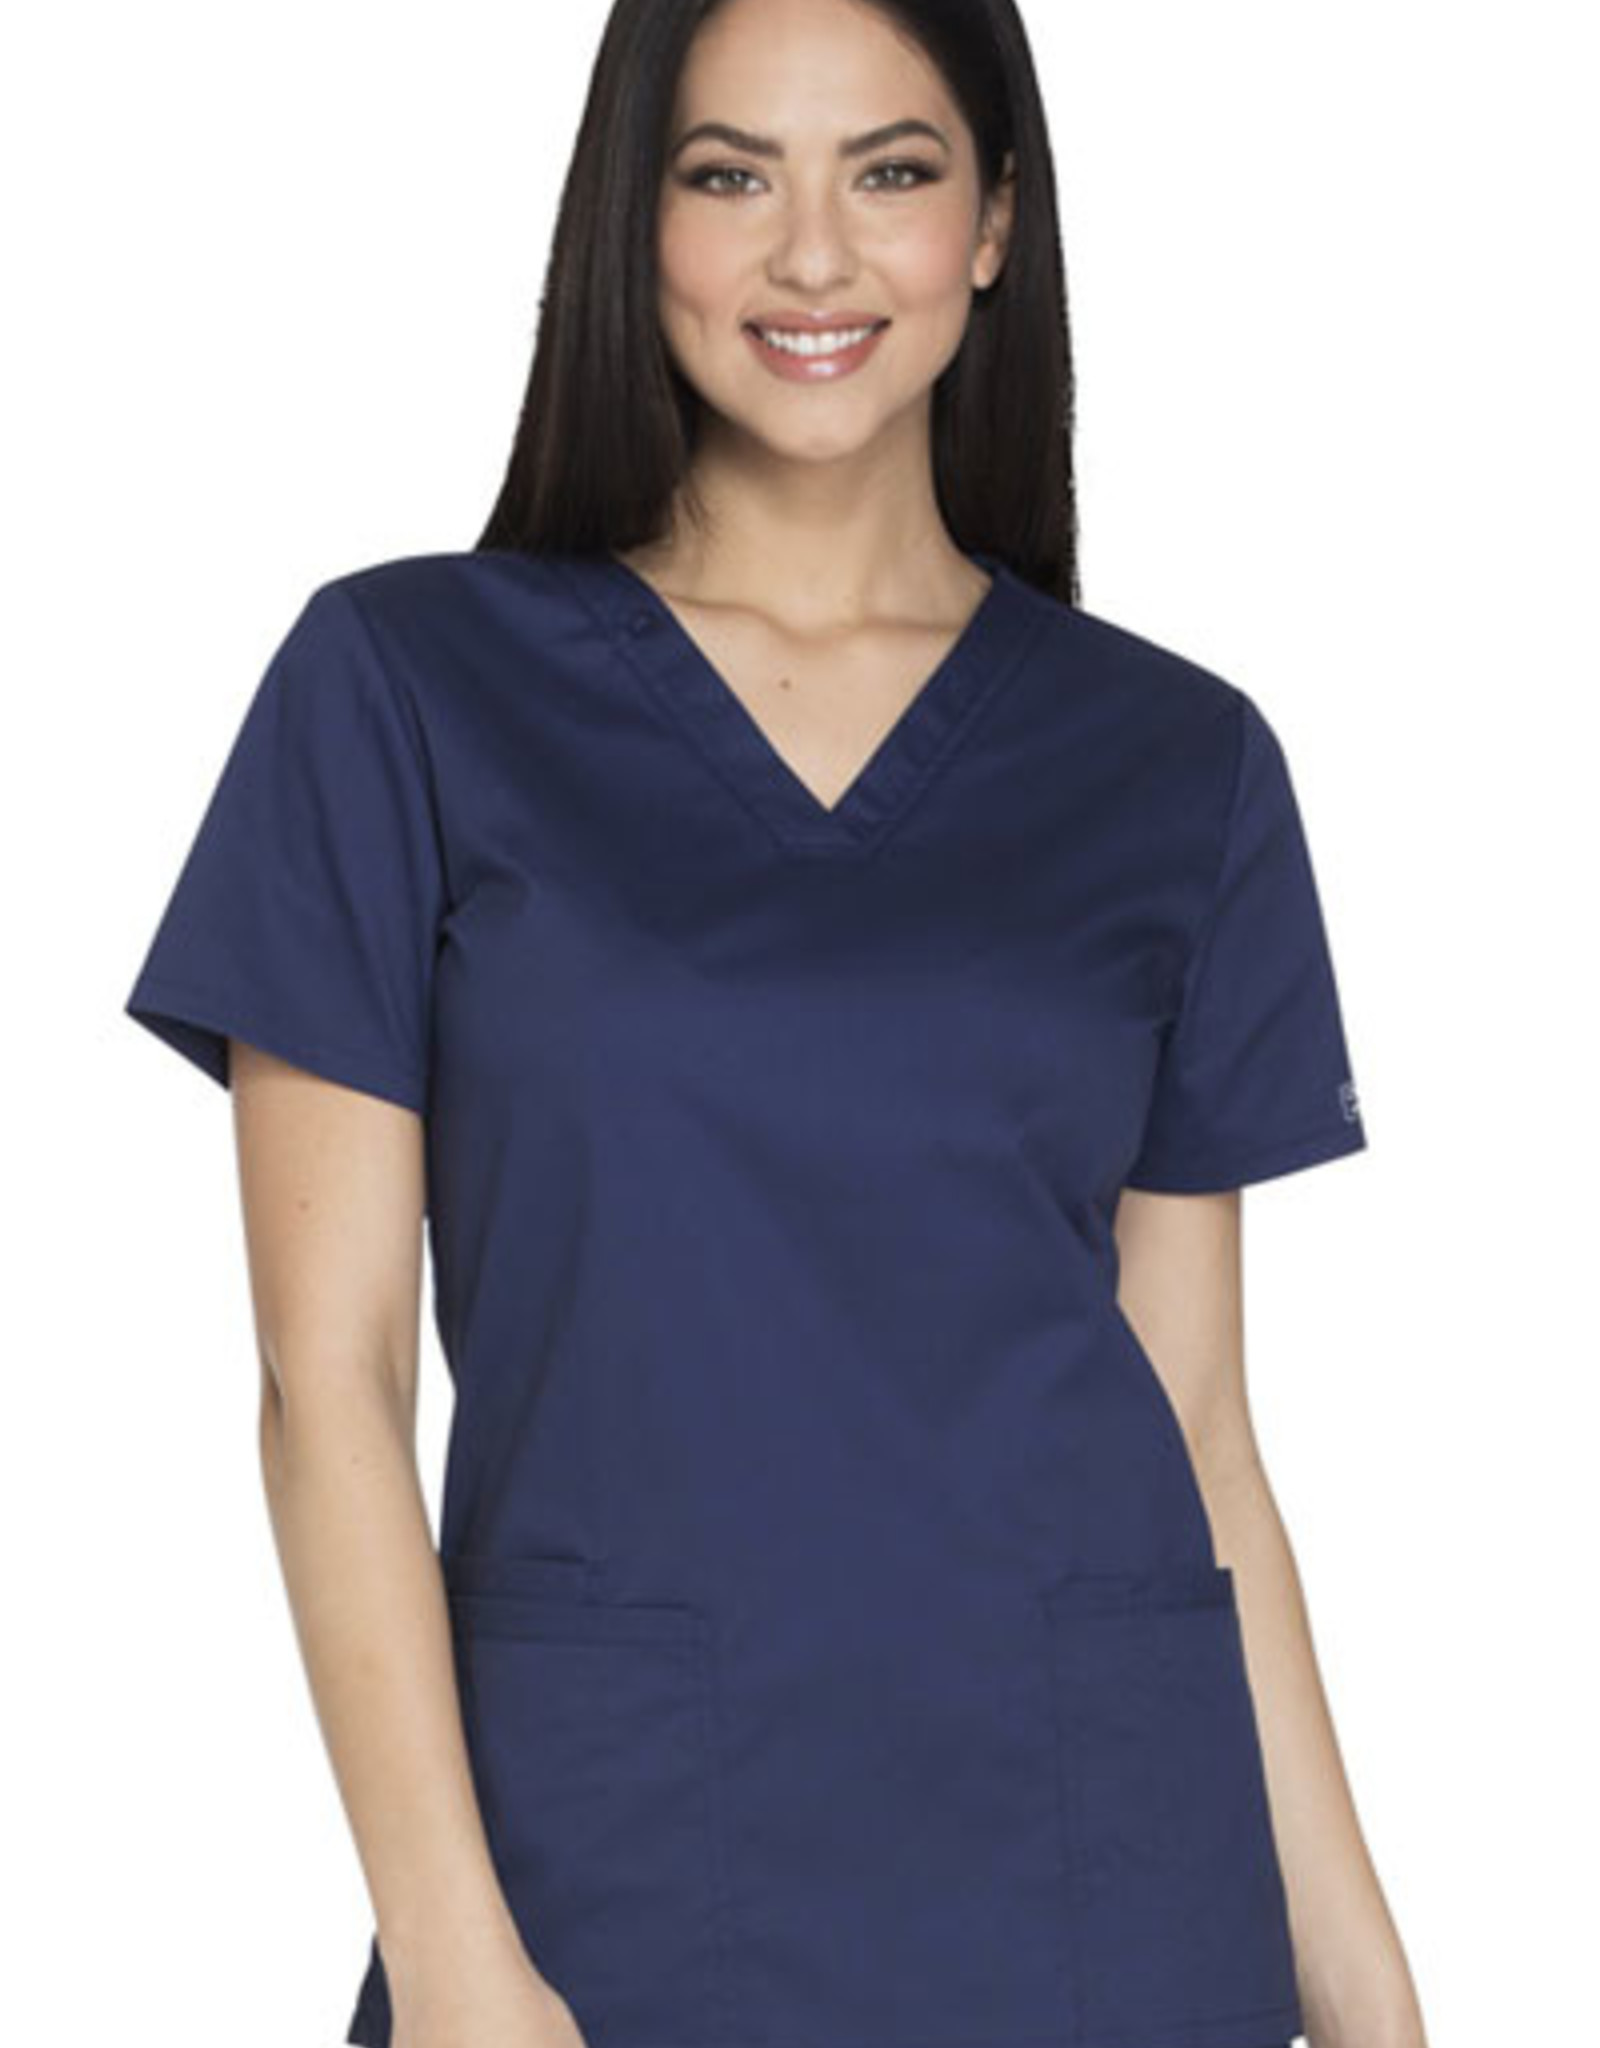 Core Stretch Women's V-Neck Top w/ Two Patch Pockets (Regular)